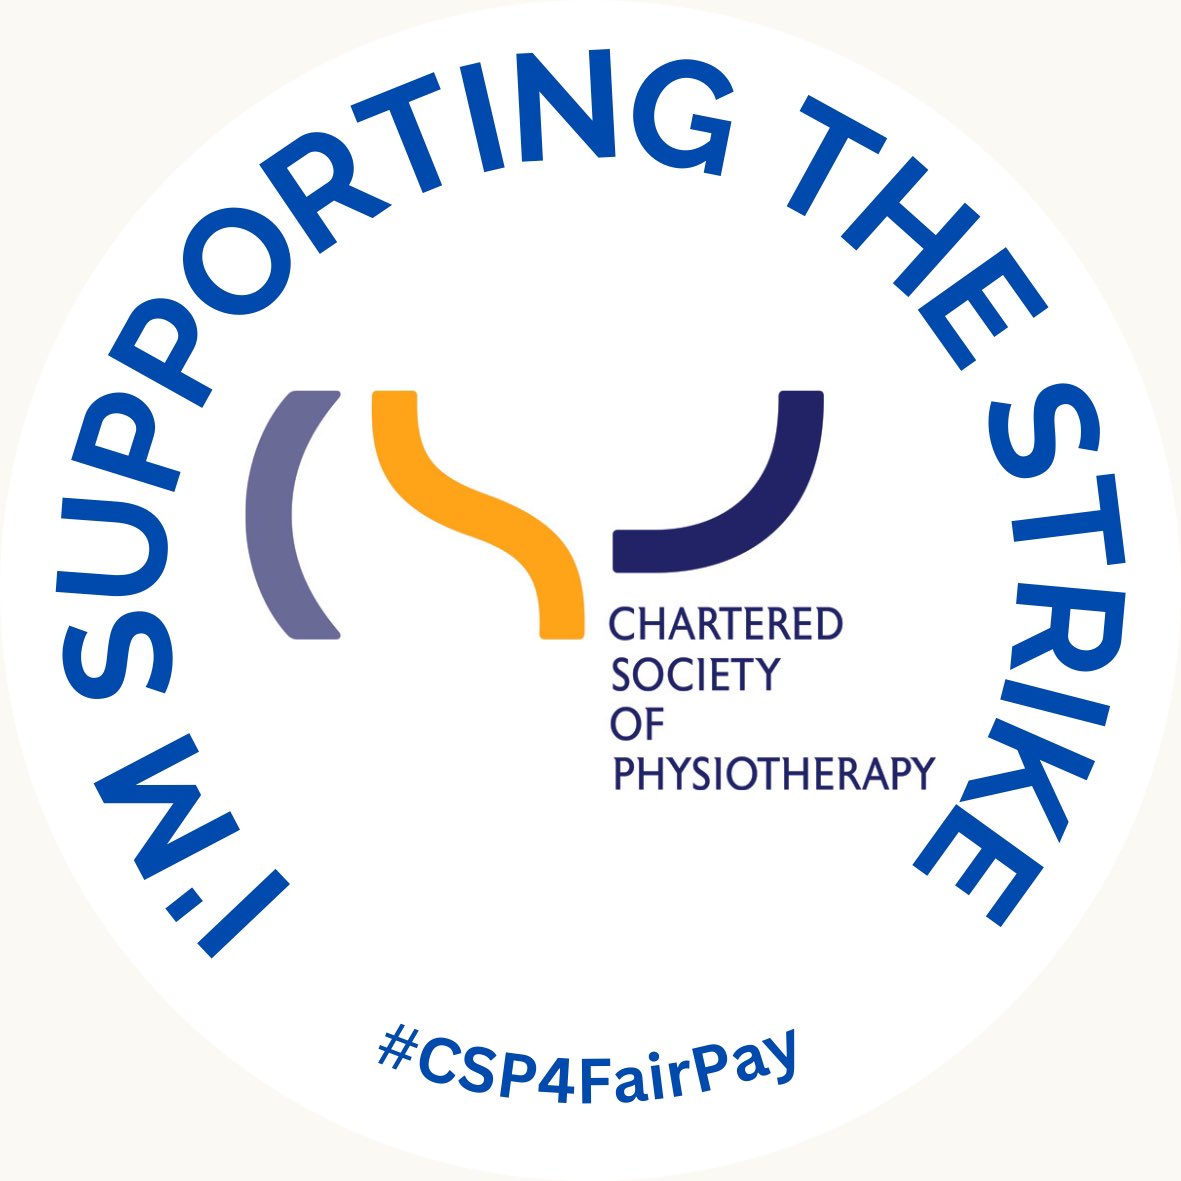 Supporting all of my colleagues taking strike action today! Fair NHS Pay = more Physio staff =better patient care💓 Time for the government to cough up #fairpay #CSP4FairPay #strikeaction #nhsfairpay